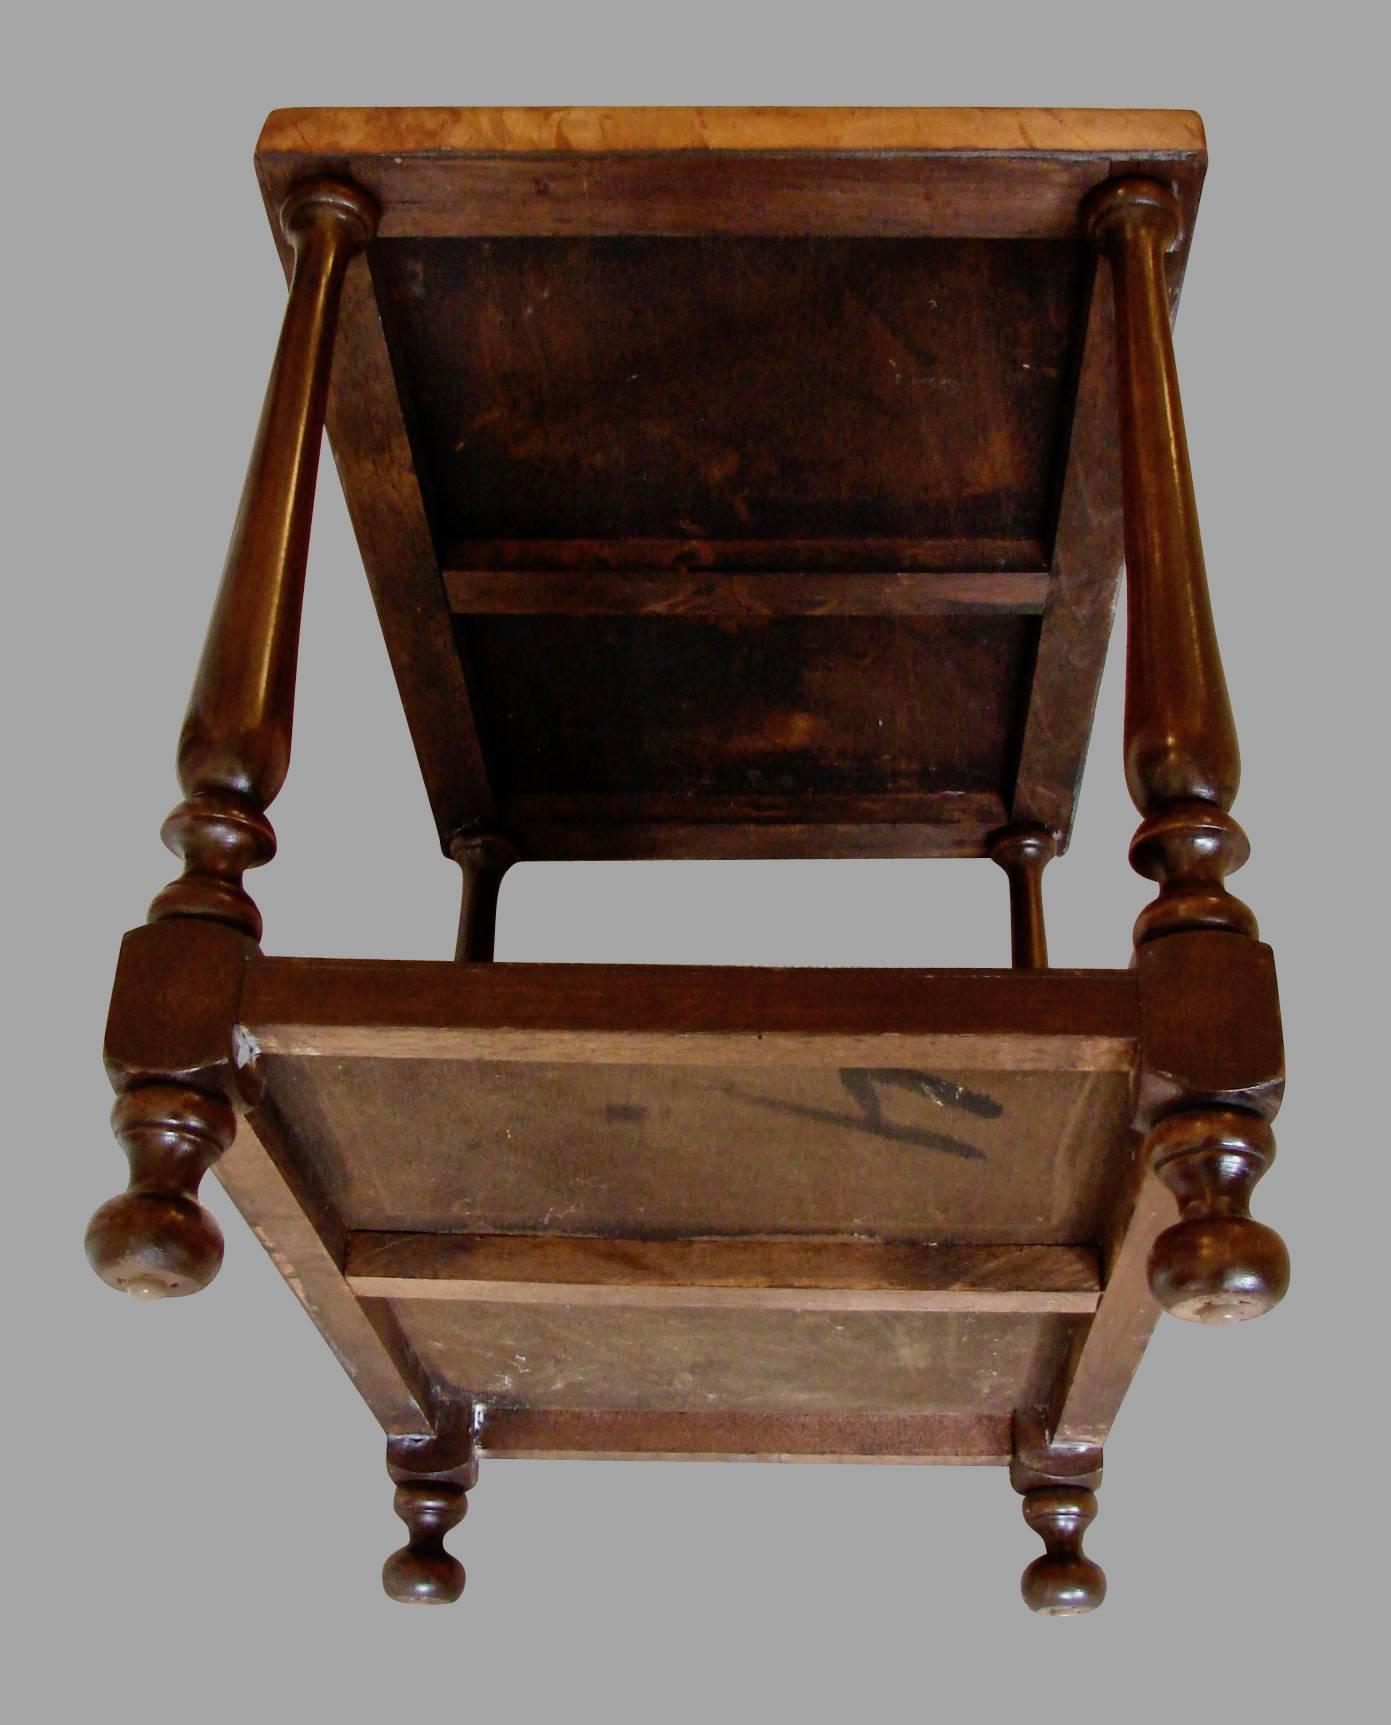 A Mexican hardwood side table with a lower shelf, the top covered with an embossed 